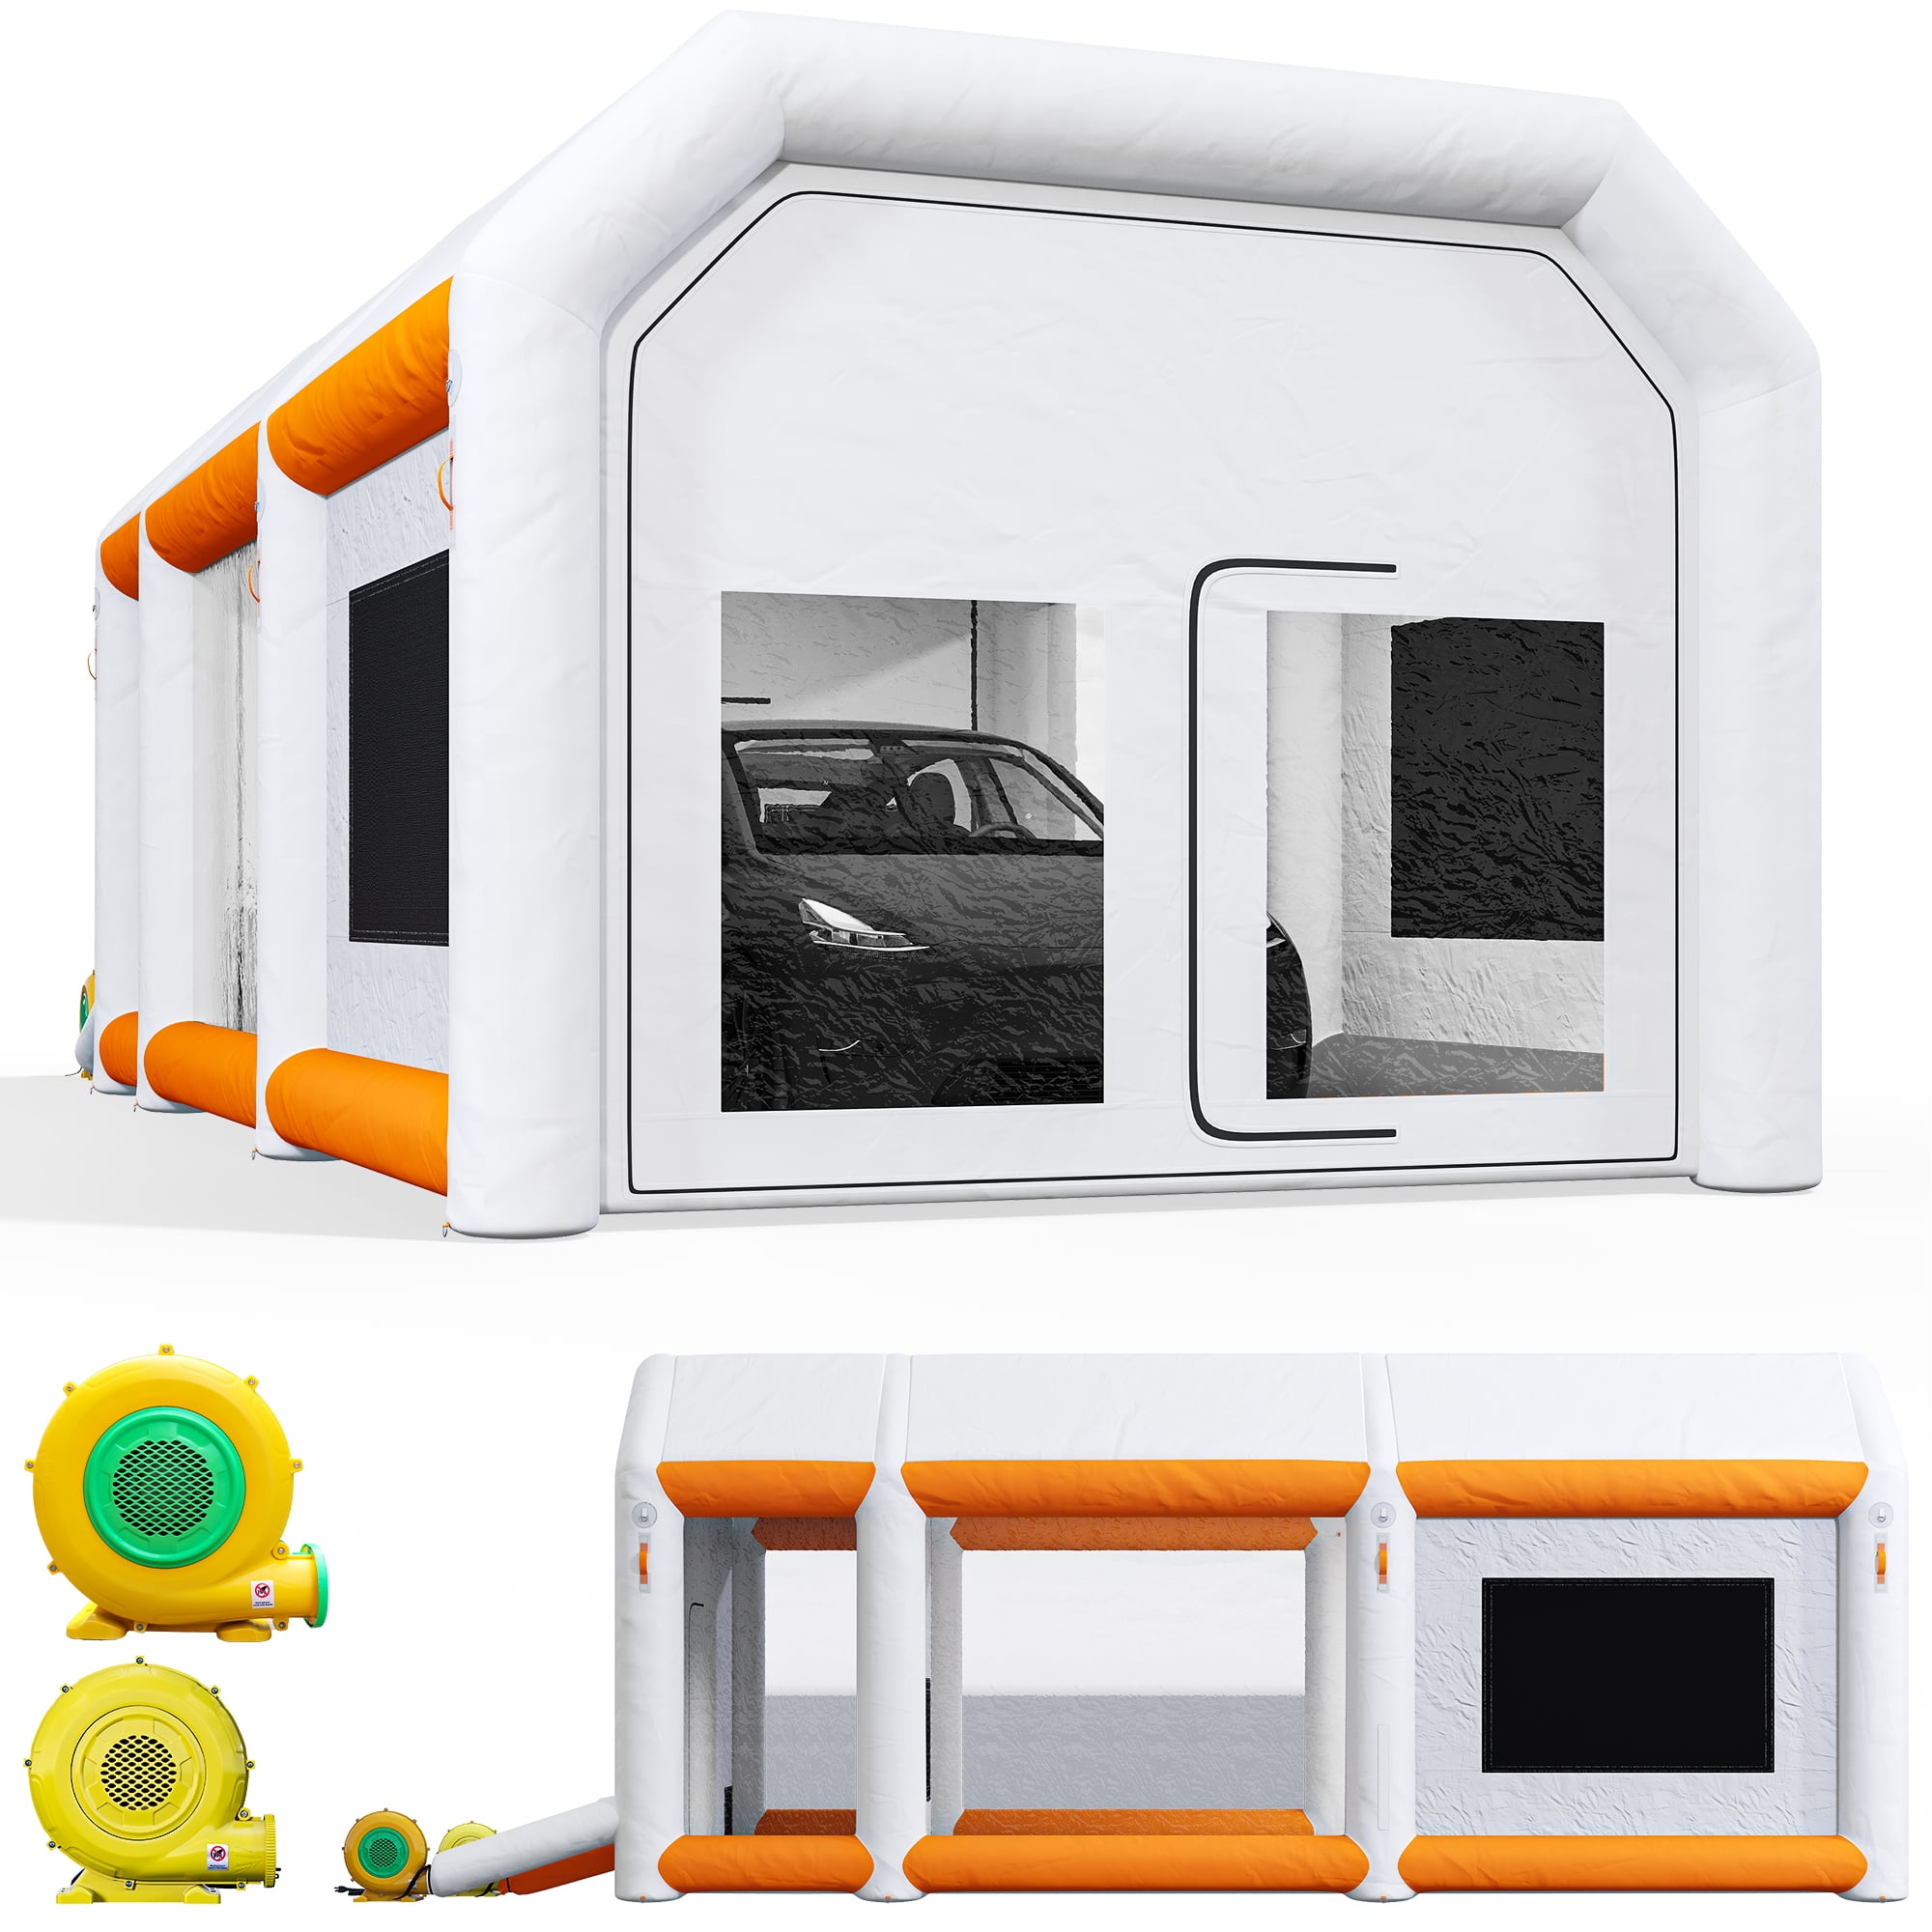 Portable Inflatable Paint Booth Large Spray Booth Car Paint Tent w/Air Filter System & Blowers Edrosie Inc Size: 118 H x 315 W x 177.2 D